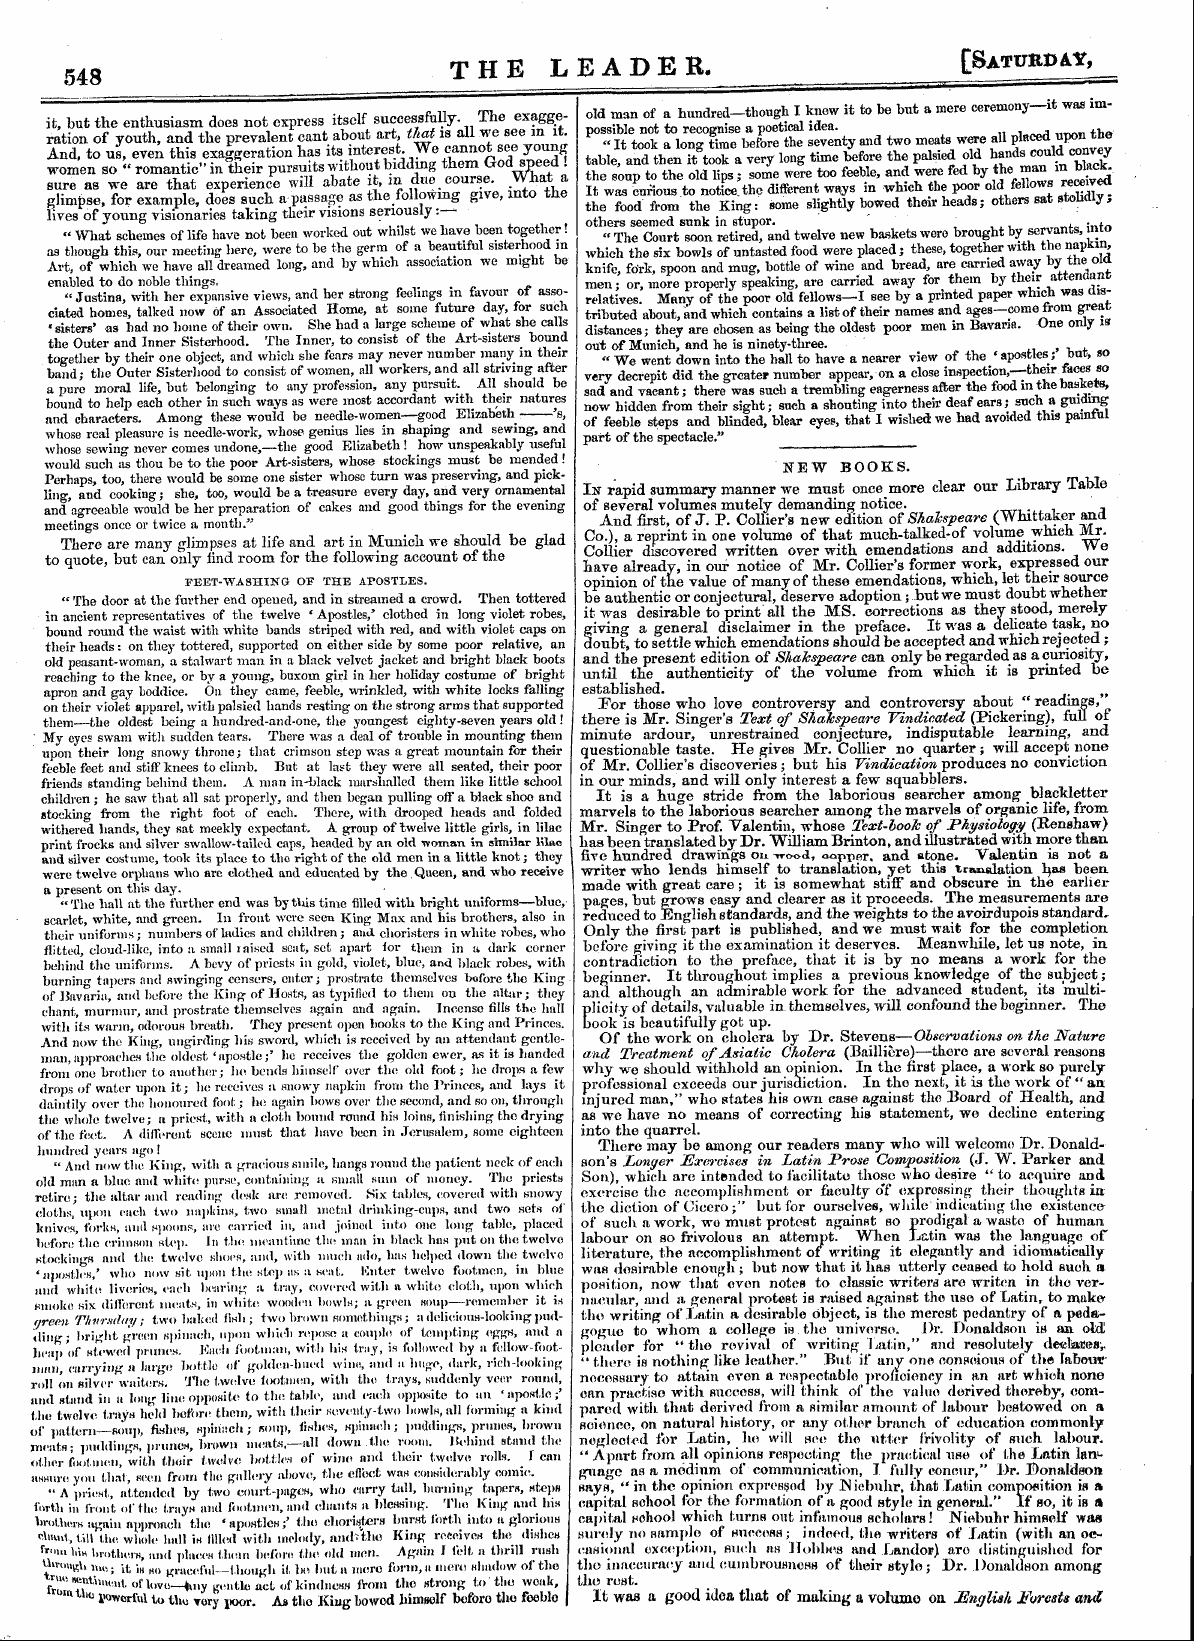 Leader (1850-1860): jS F Y, 1st edition: 20